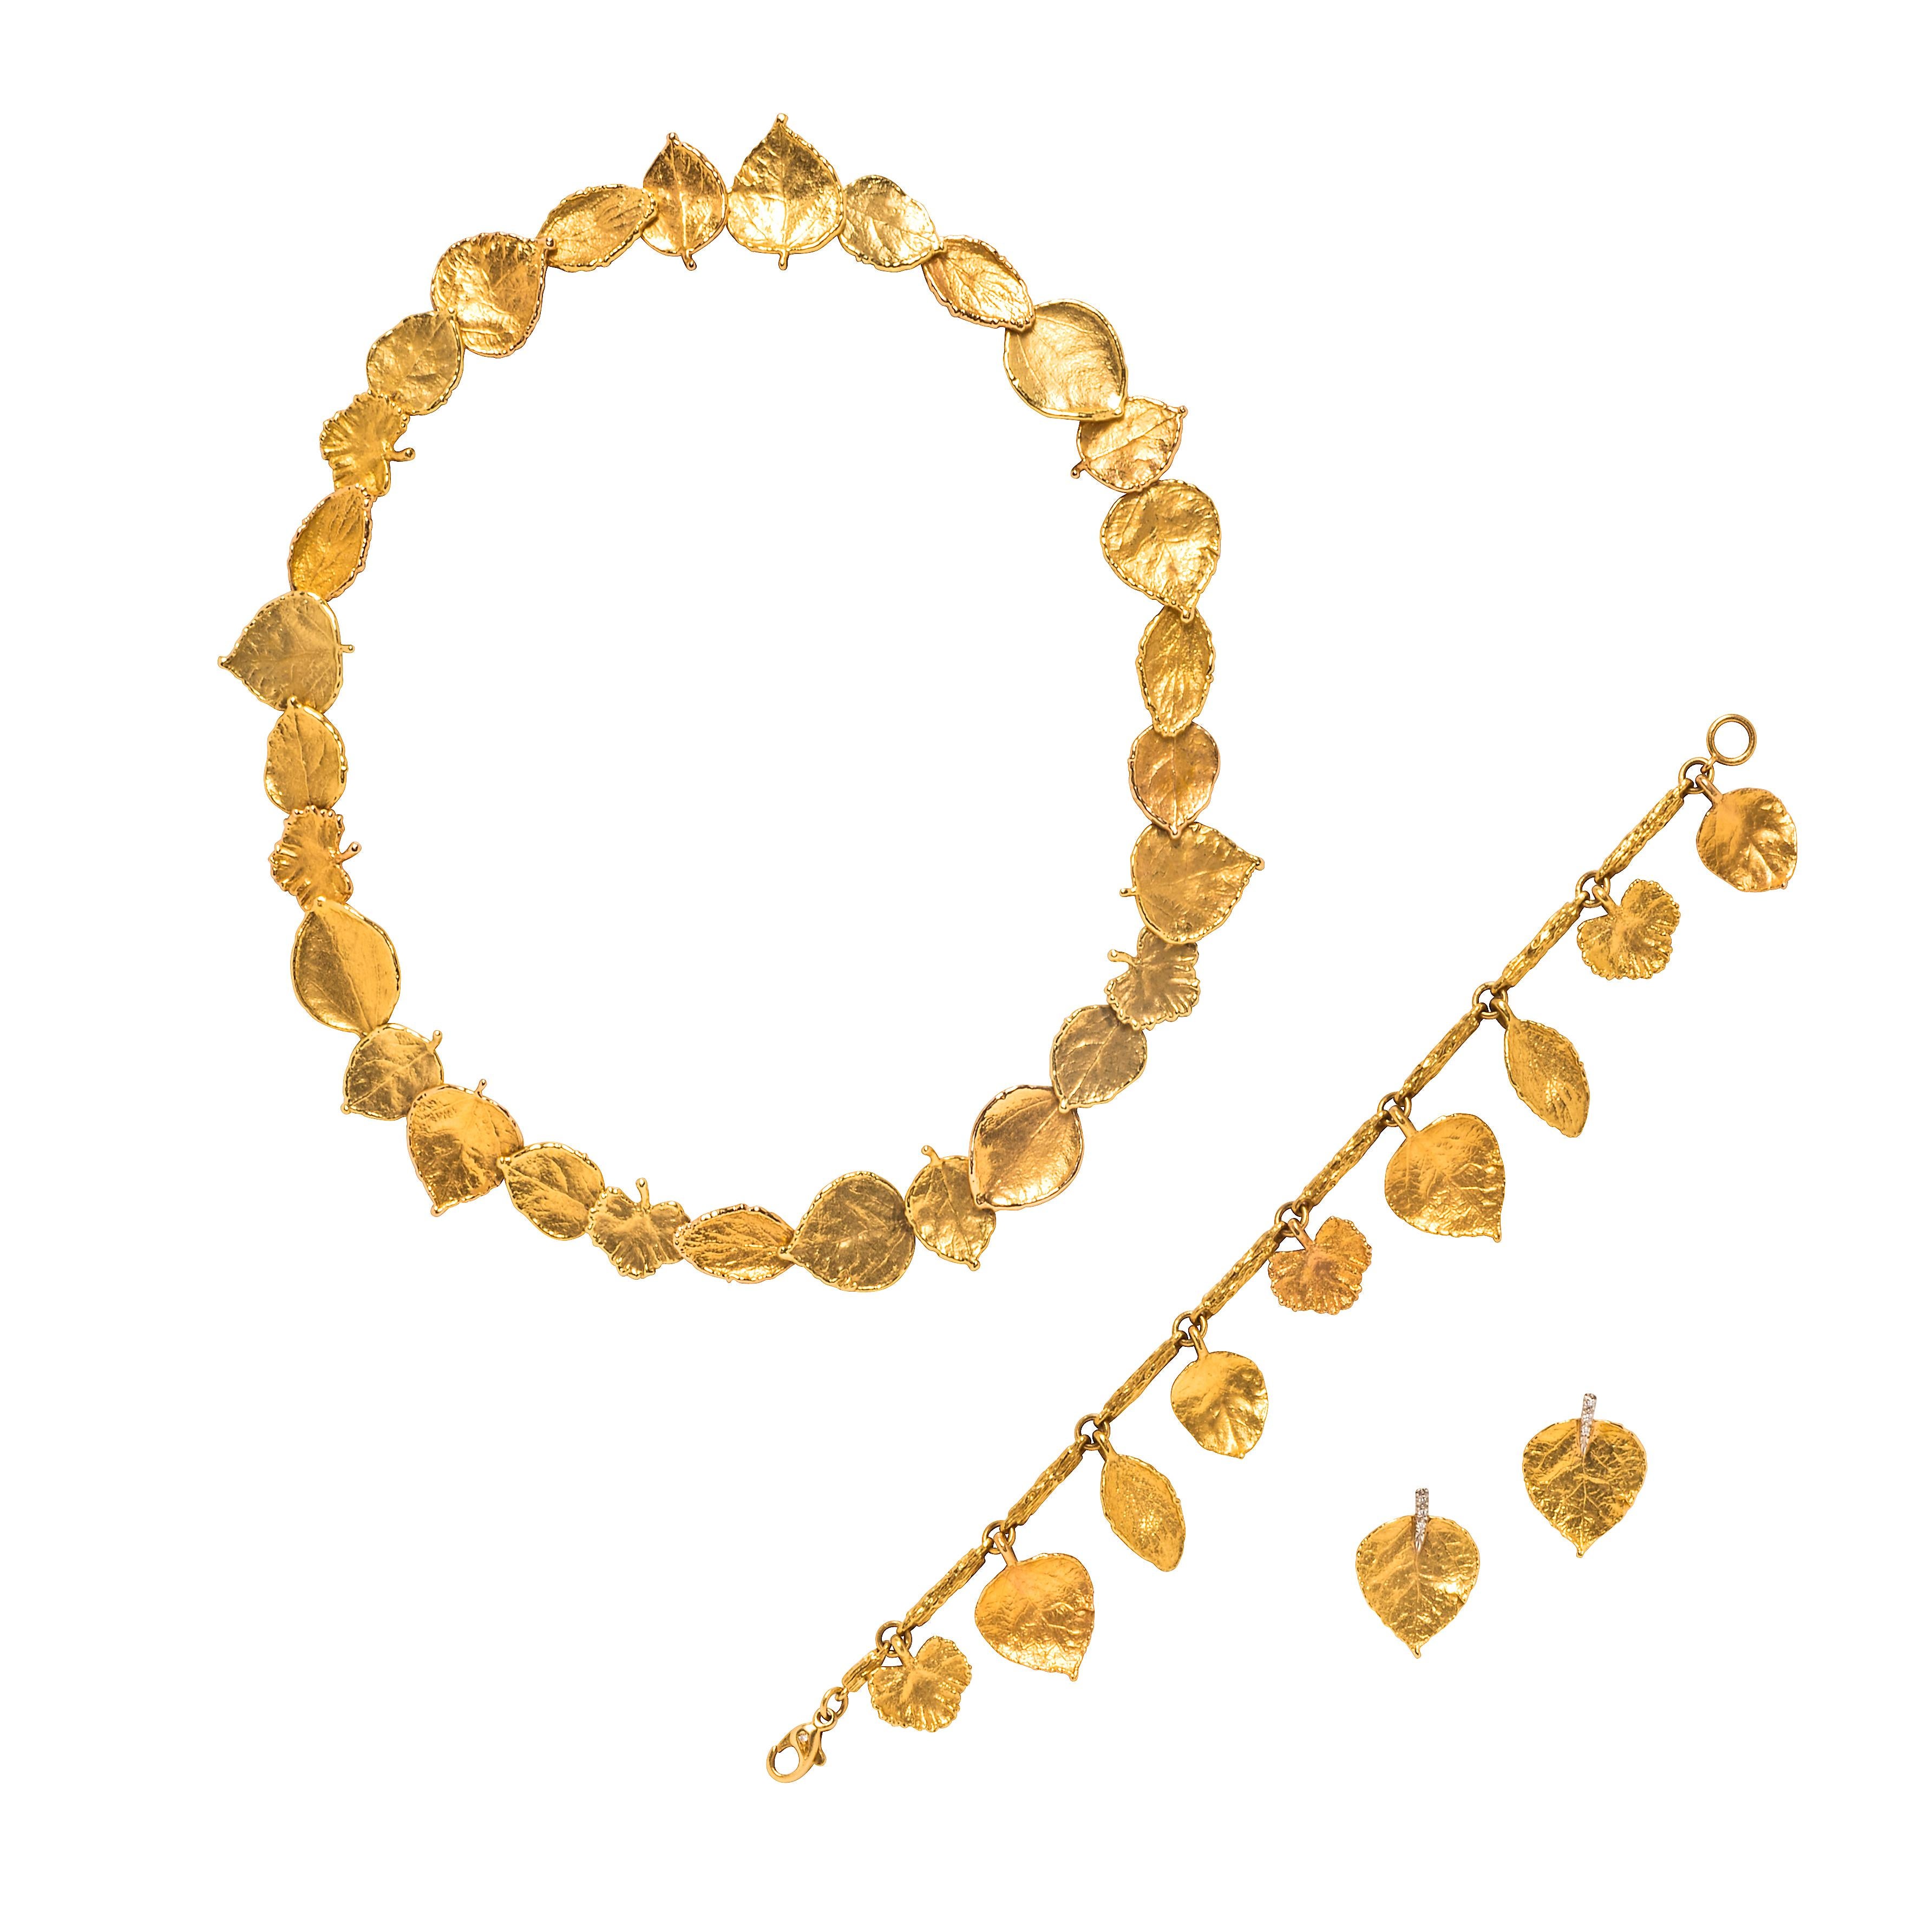 Comprising a necklace set with a series of links in the form of 19k and 18k yellow gold leaves of varying shapes, with ‘AH’ maker’s mark; and a pair of earrings of similar design, with diamond-set stems, set in 18k yellow gold and platinum, signed